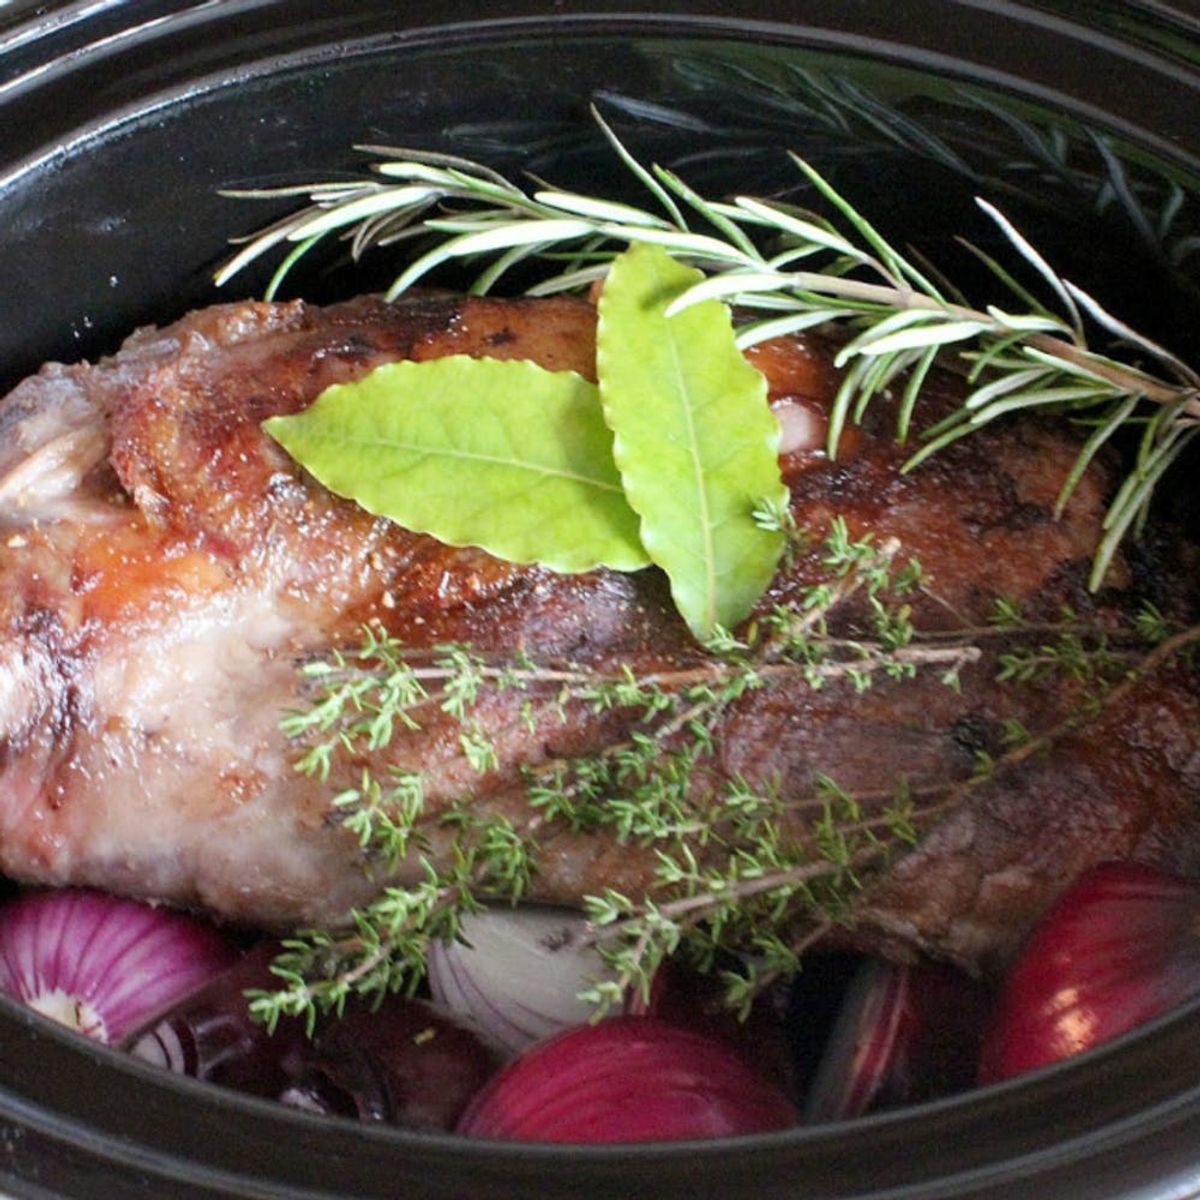 Slow Cooker Recipes — Including a Lamb Roast for Easter